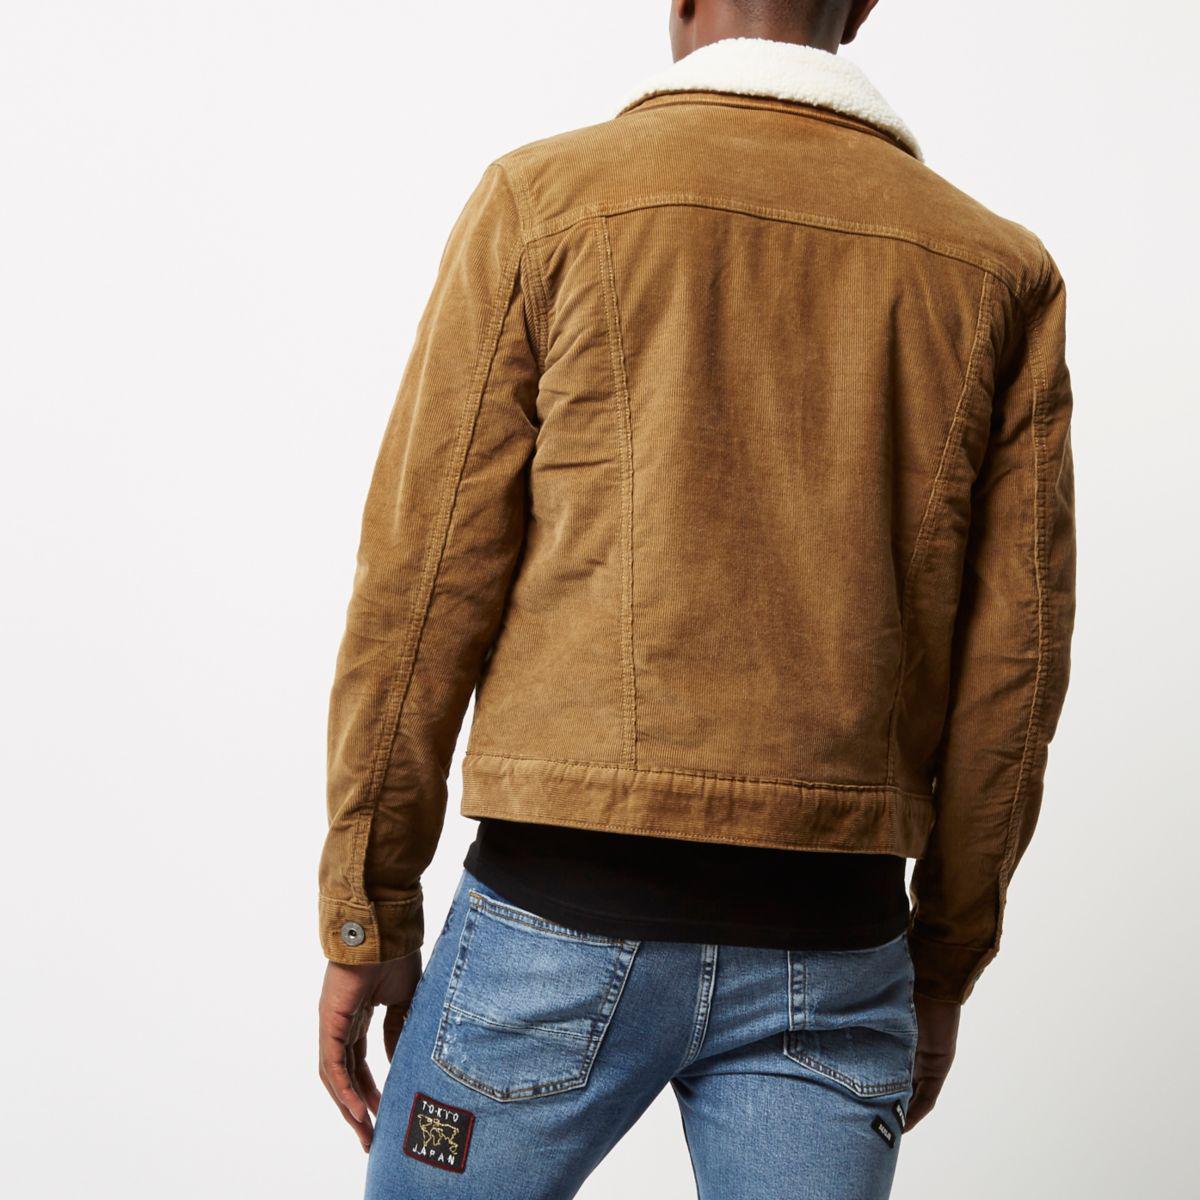 River Island Brown Borg Lined Corduroy Jacket for Men - Lyst